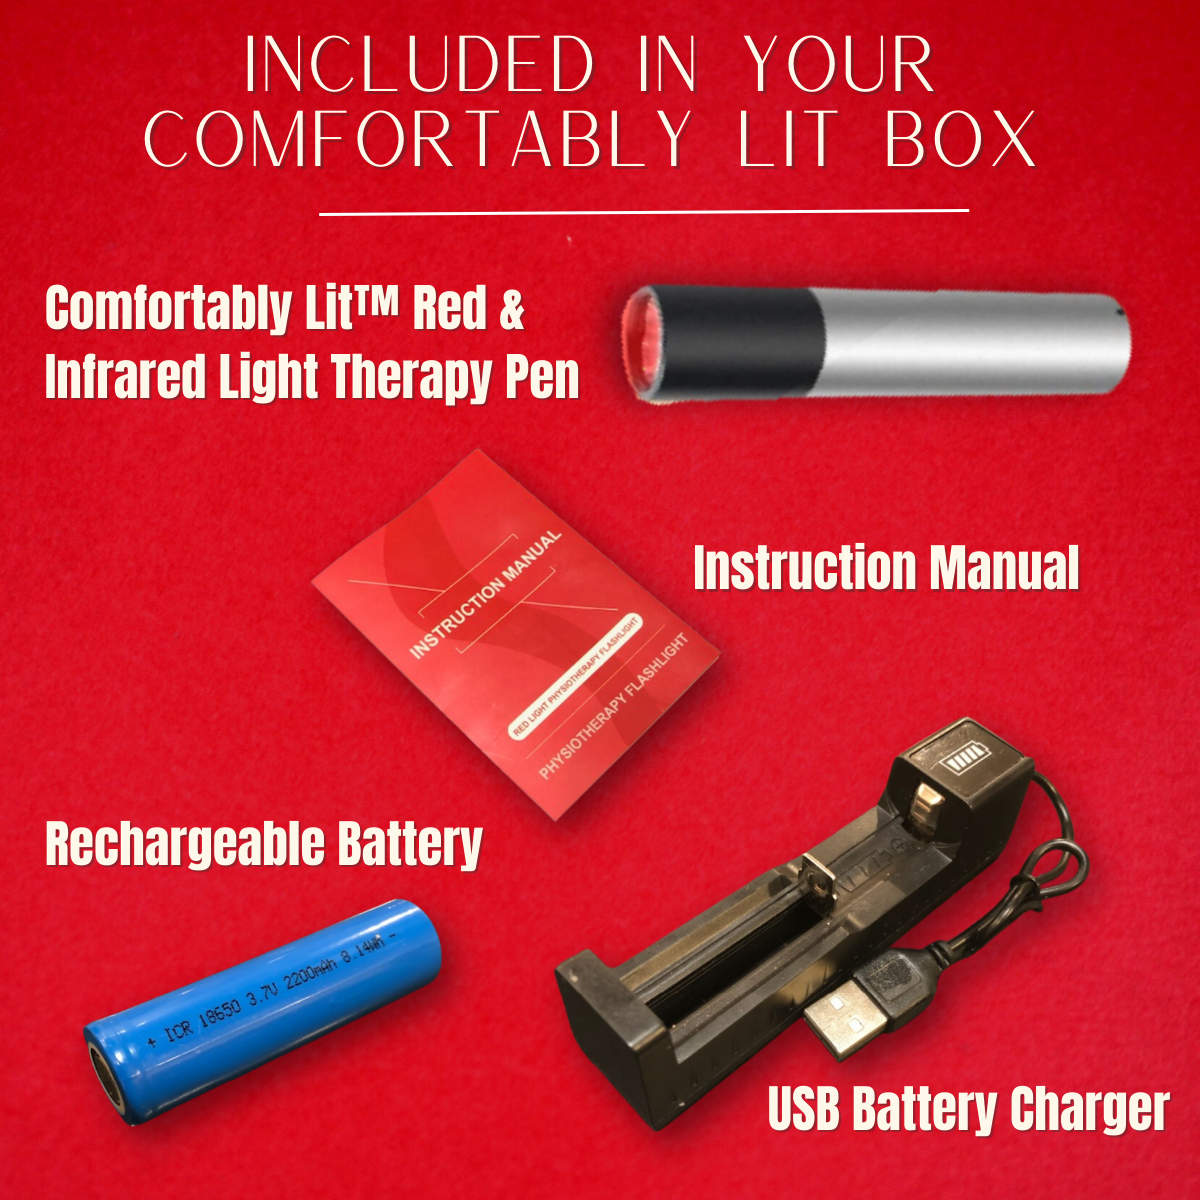 Comfortably Lit red light therapy tri-spectrum wand pen to target sore and inflamed joints, tissues and muscles.